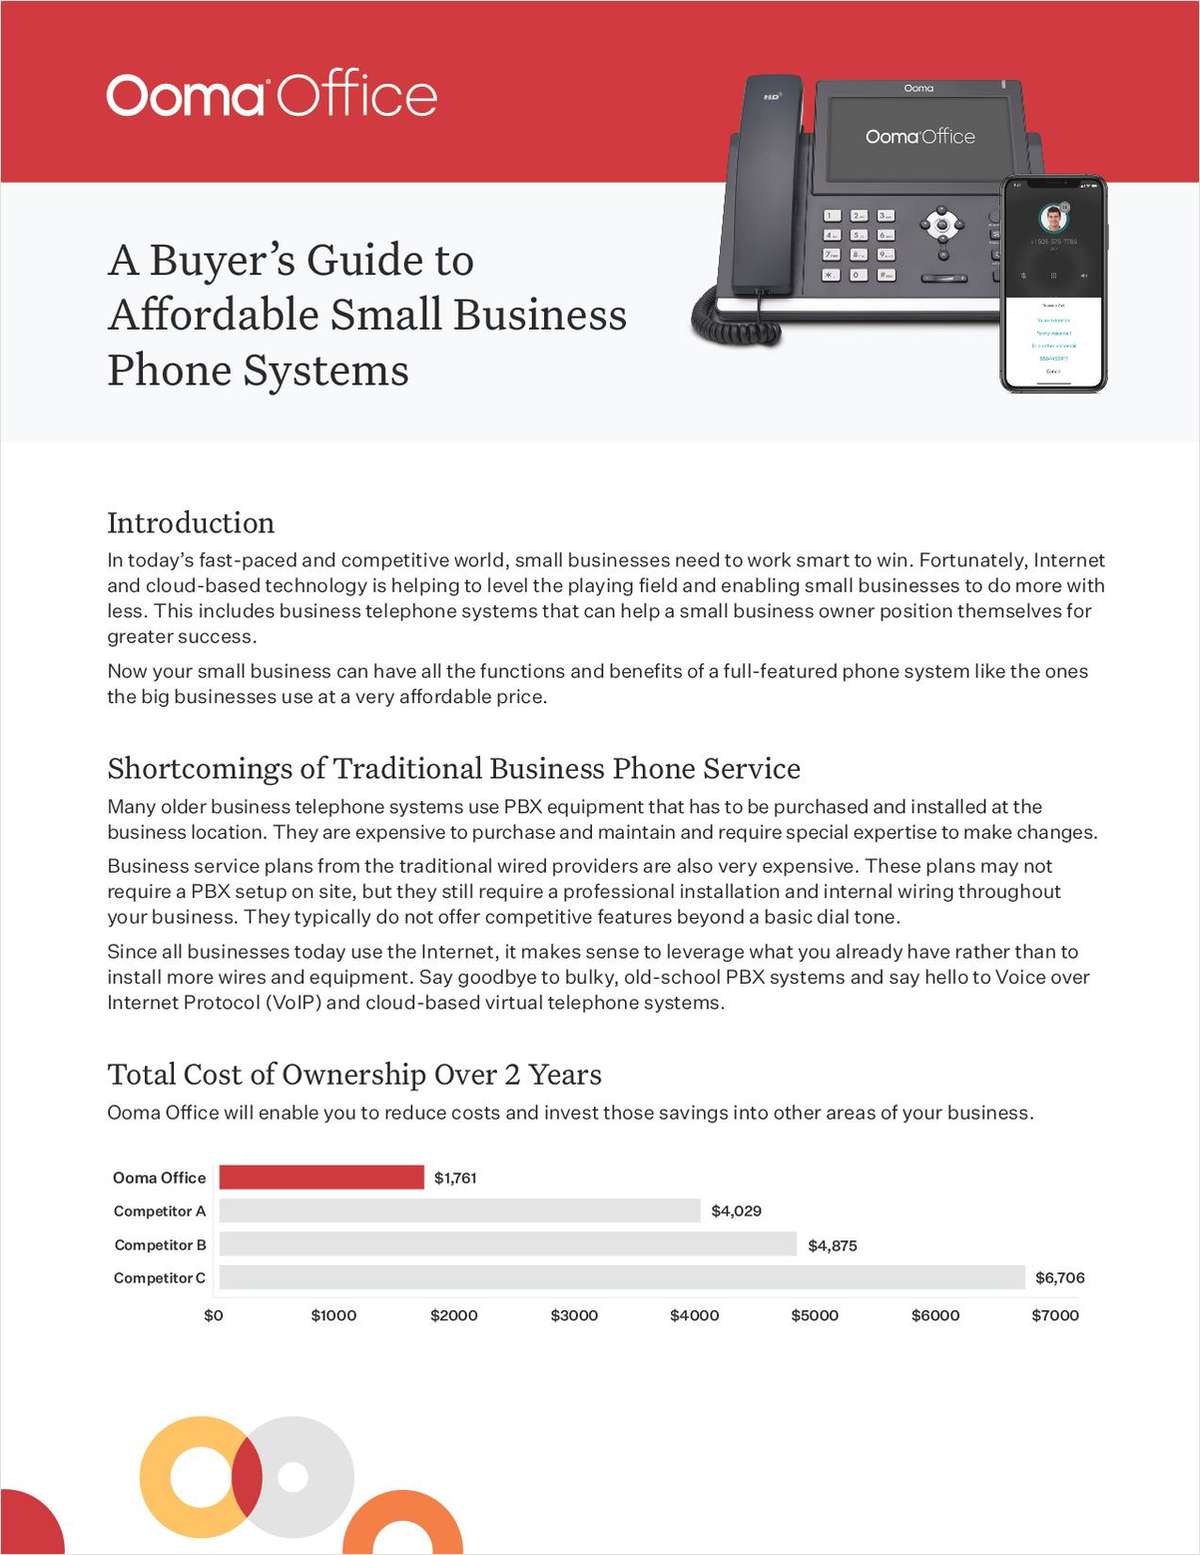 A Buyer's Guide to Affordable Small Business Phone Systems